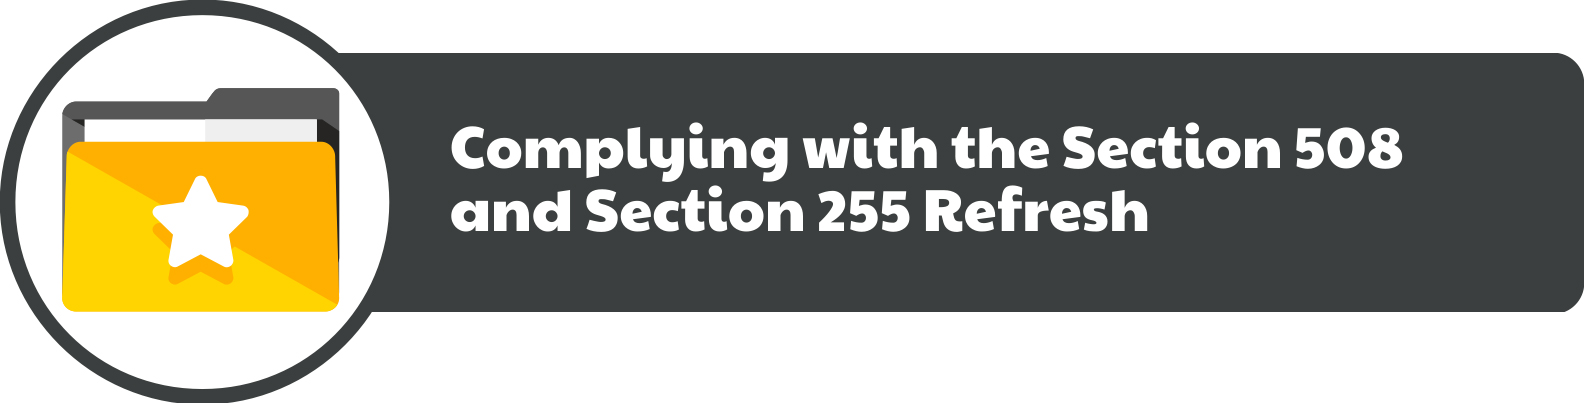 Complying with the section 508 and section 522 refresh.